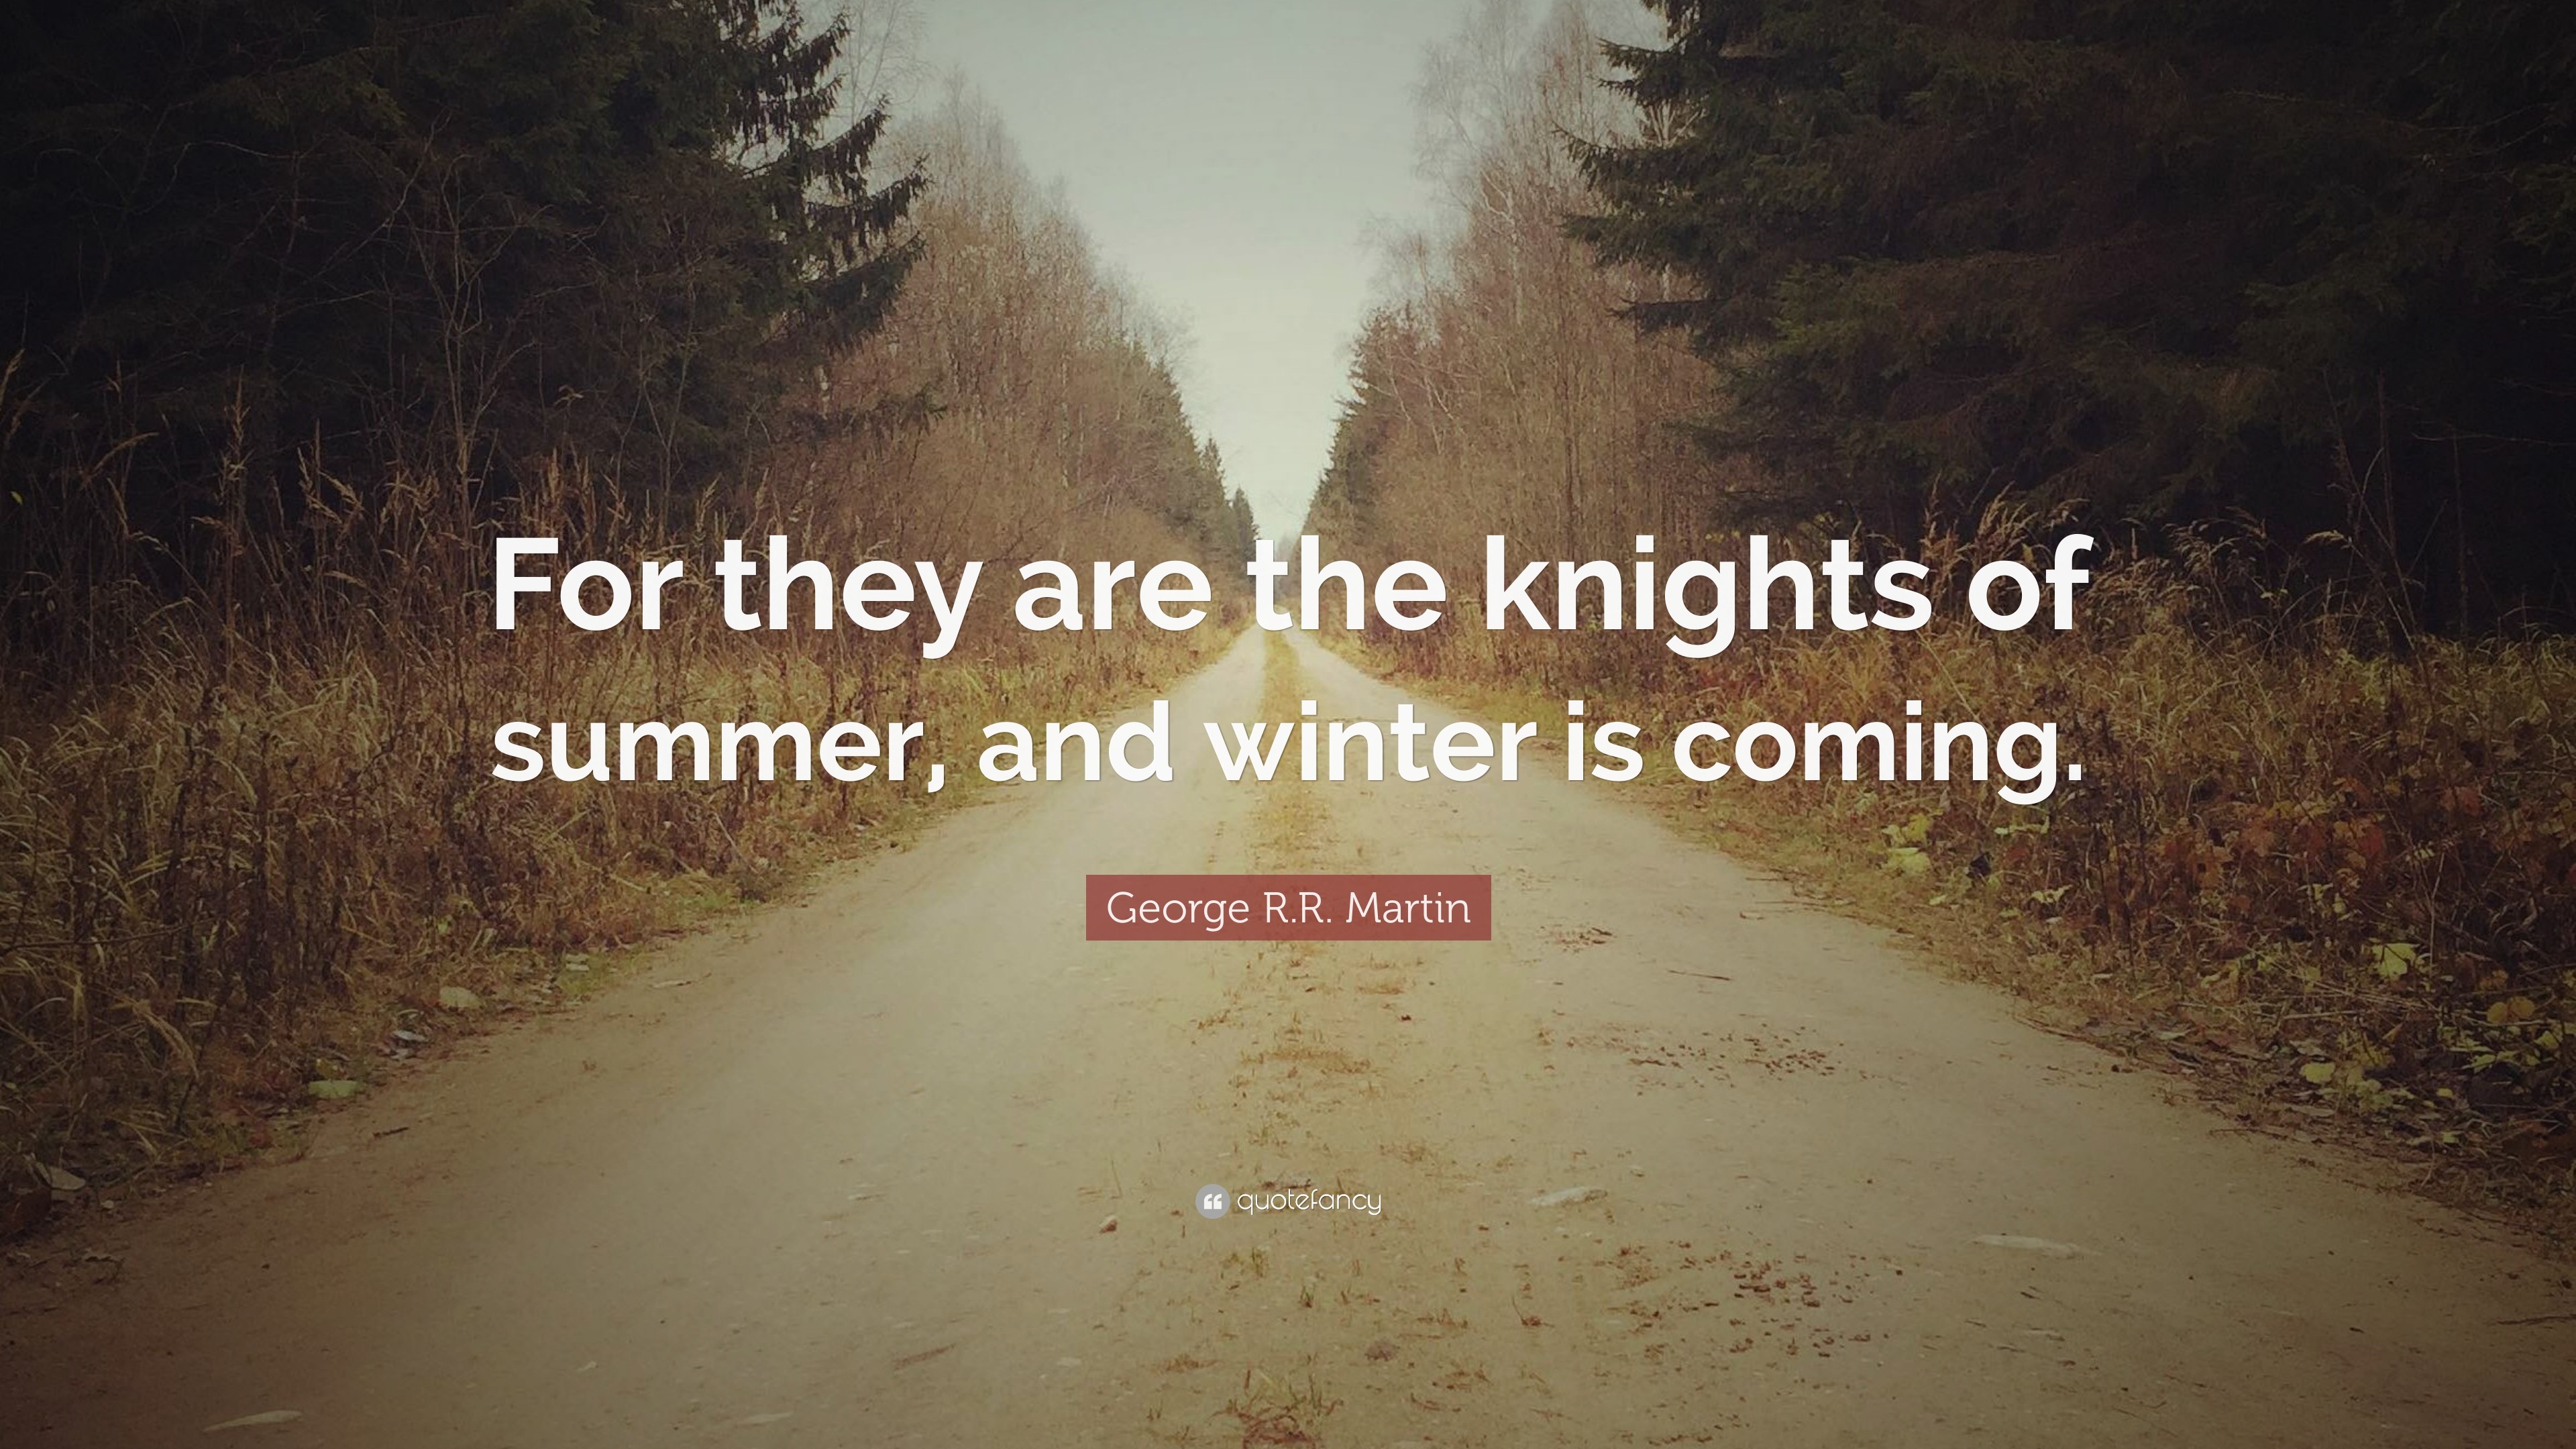 3840x2160 12 wallpapers. George R.R. Martin Quote: “For they are the knights of  summer, and winter